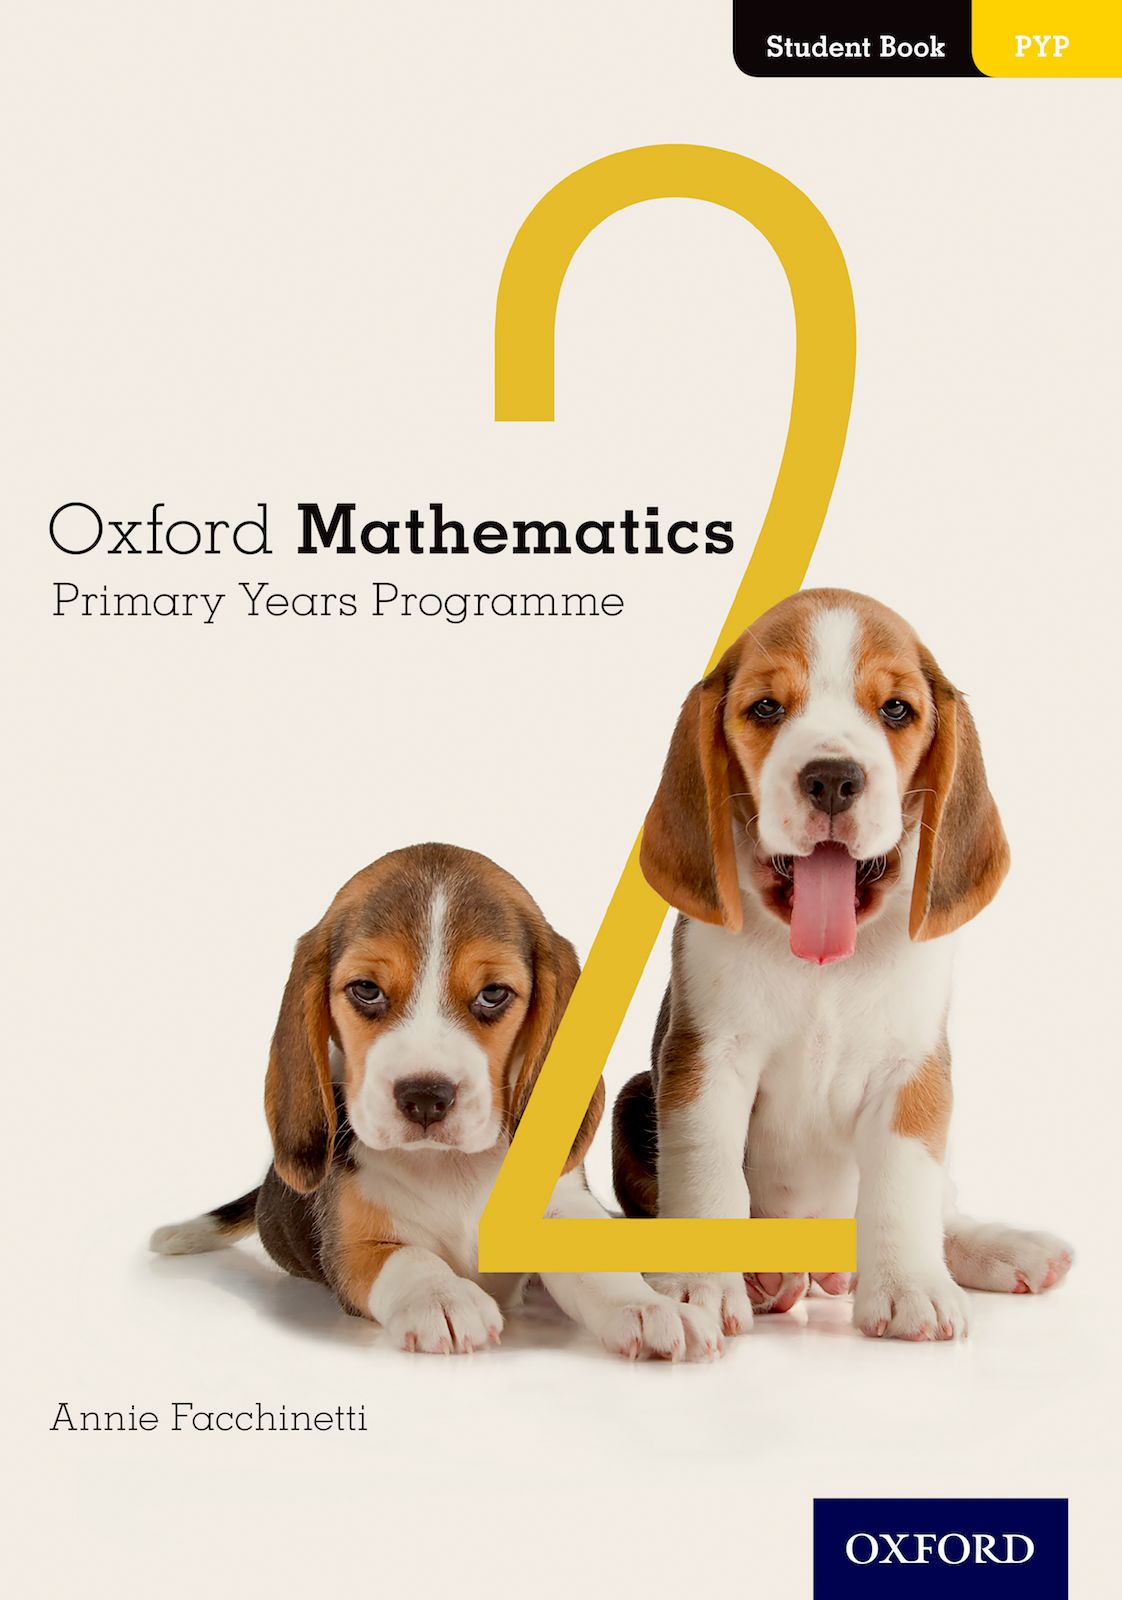 Featured image for “Oxford Mathematics Primary Years Programme Student Book 2”